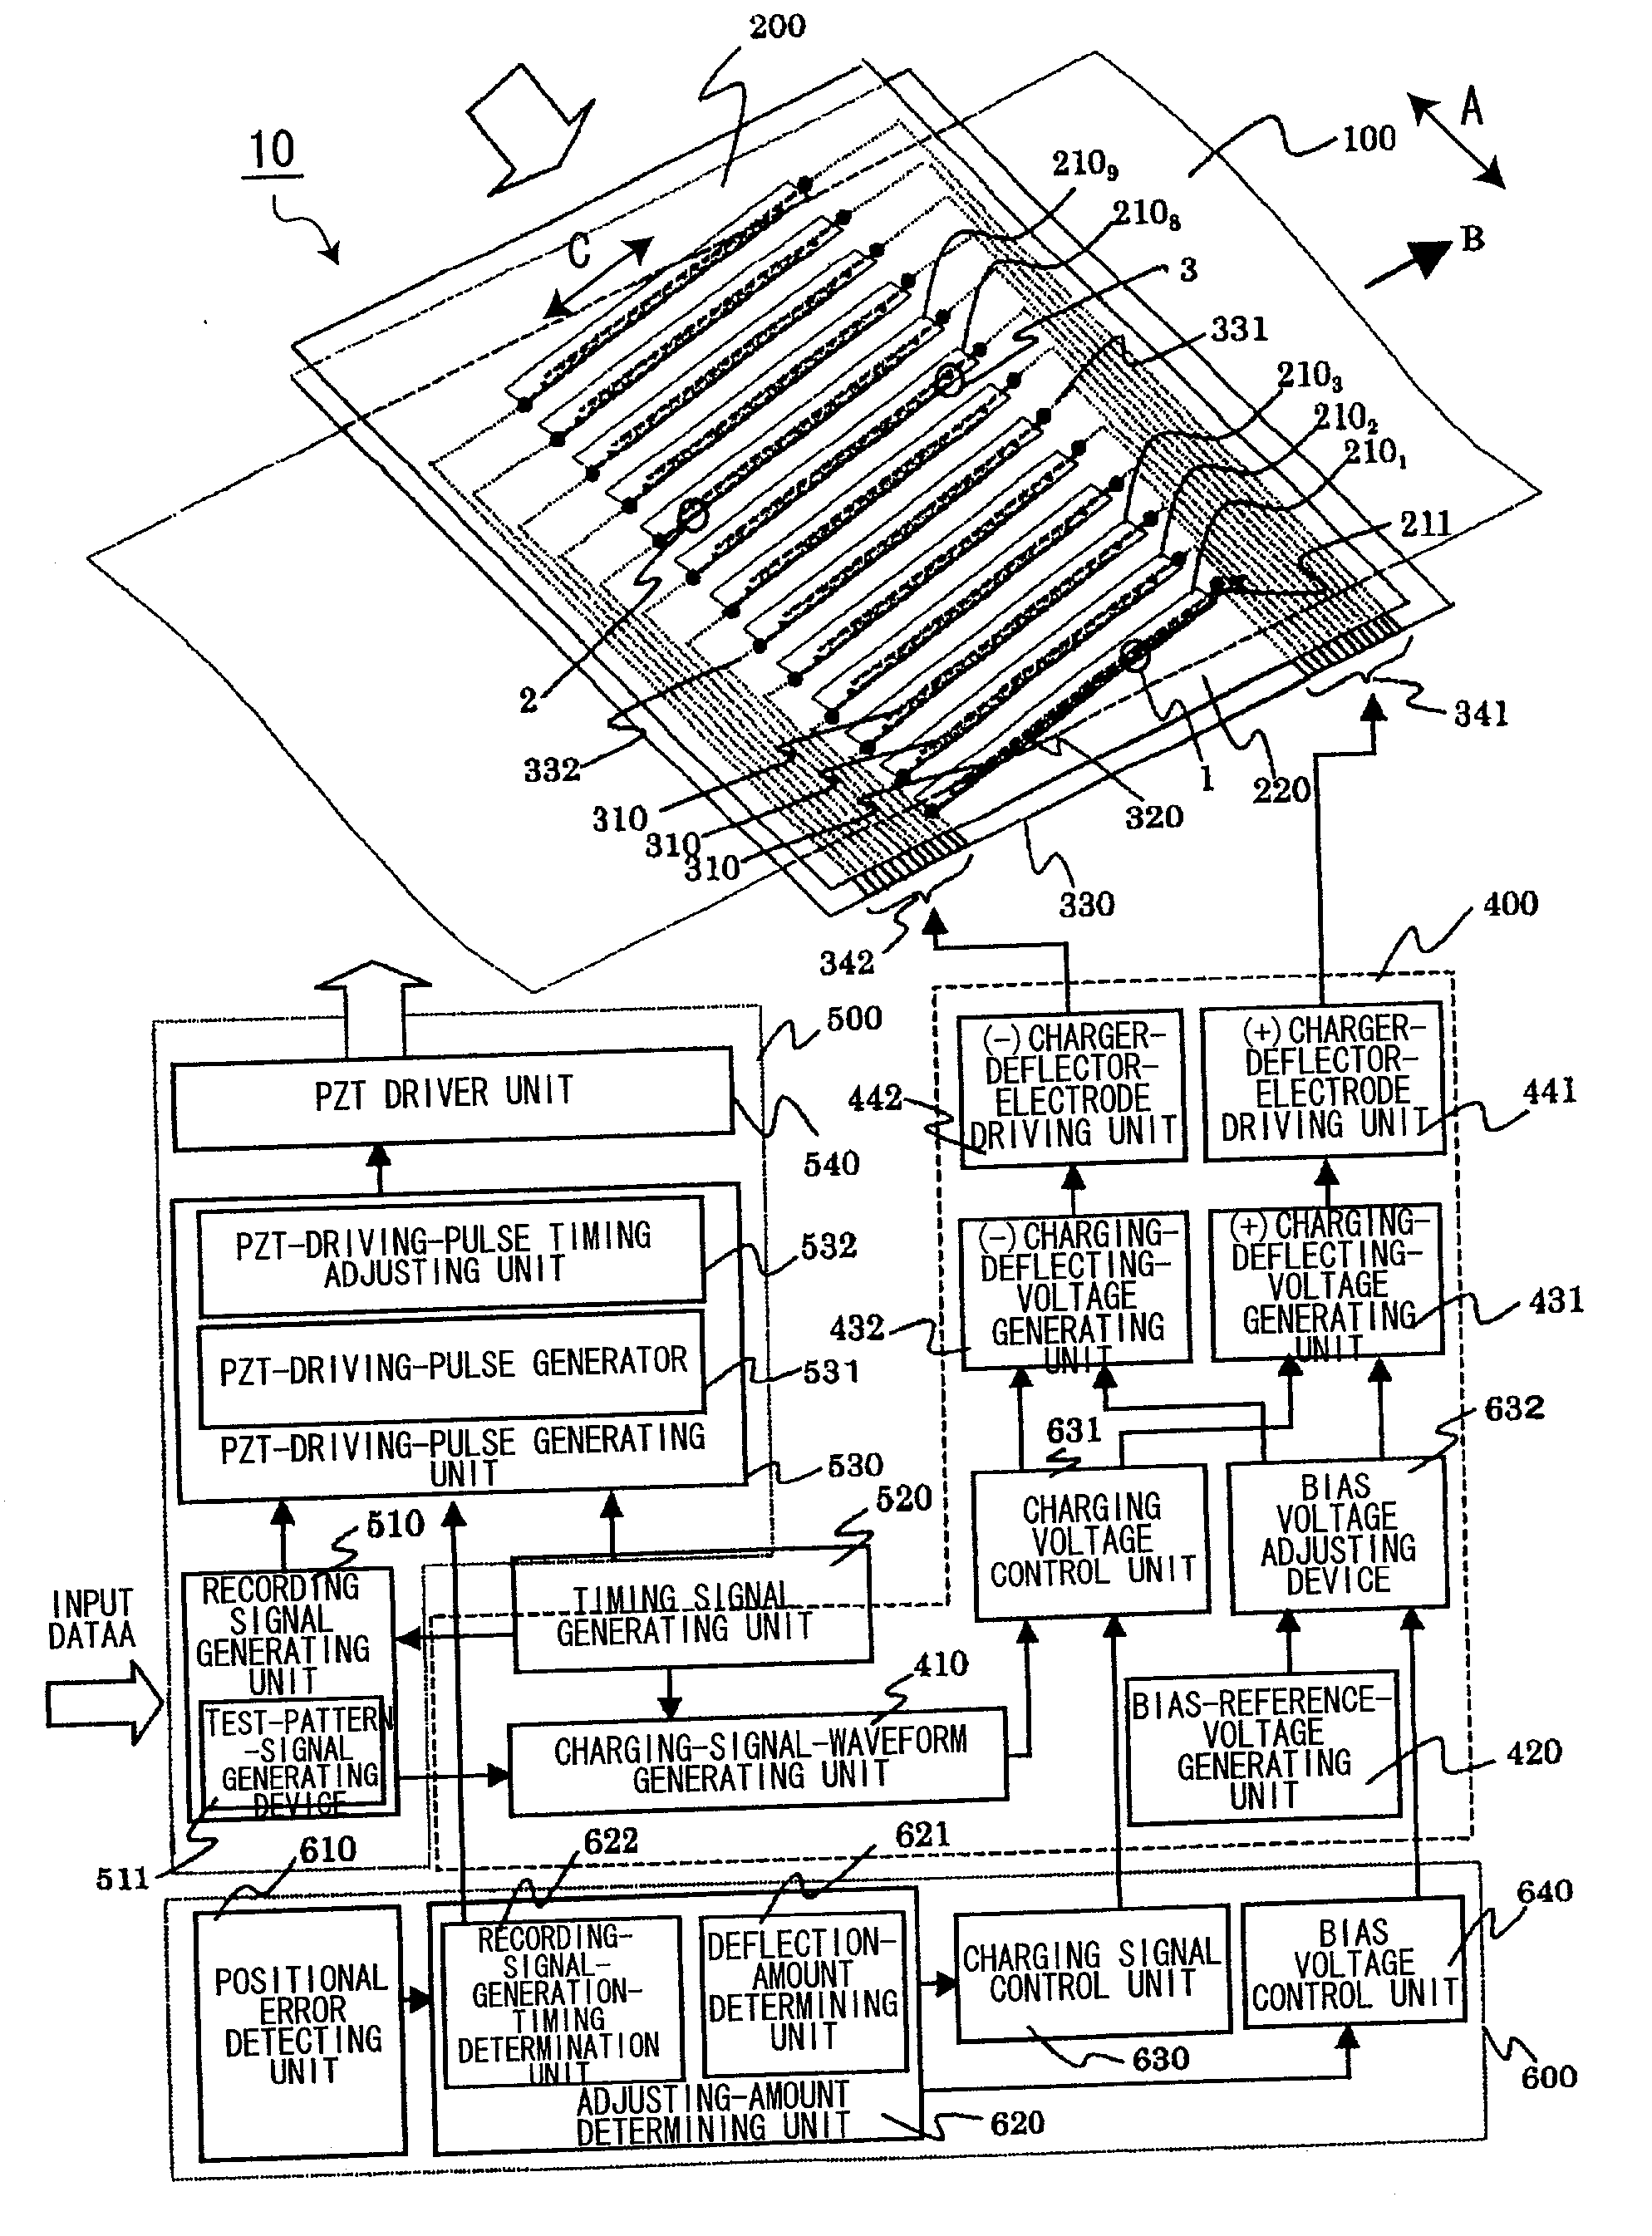 Ink jet recording device capable of controlling impact positions of ink droplets in electrical manner